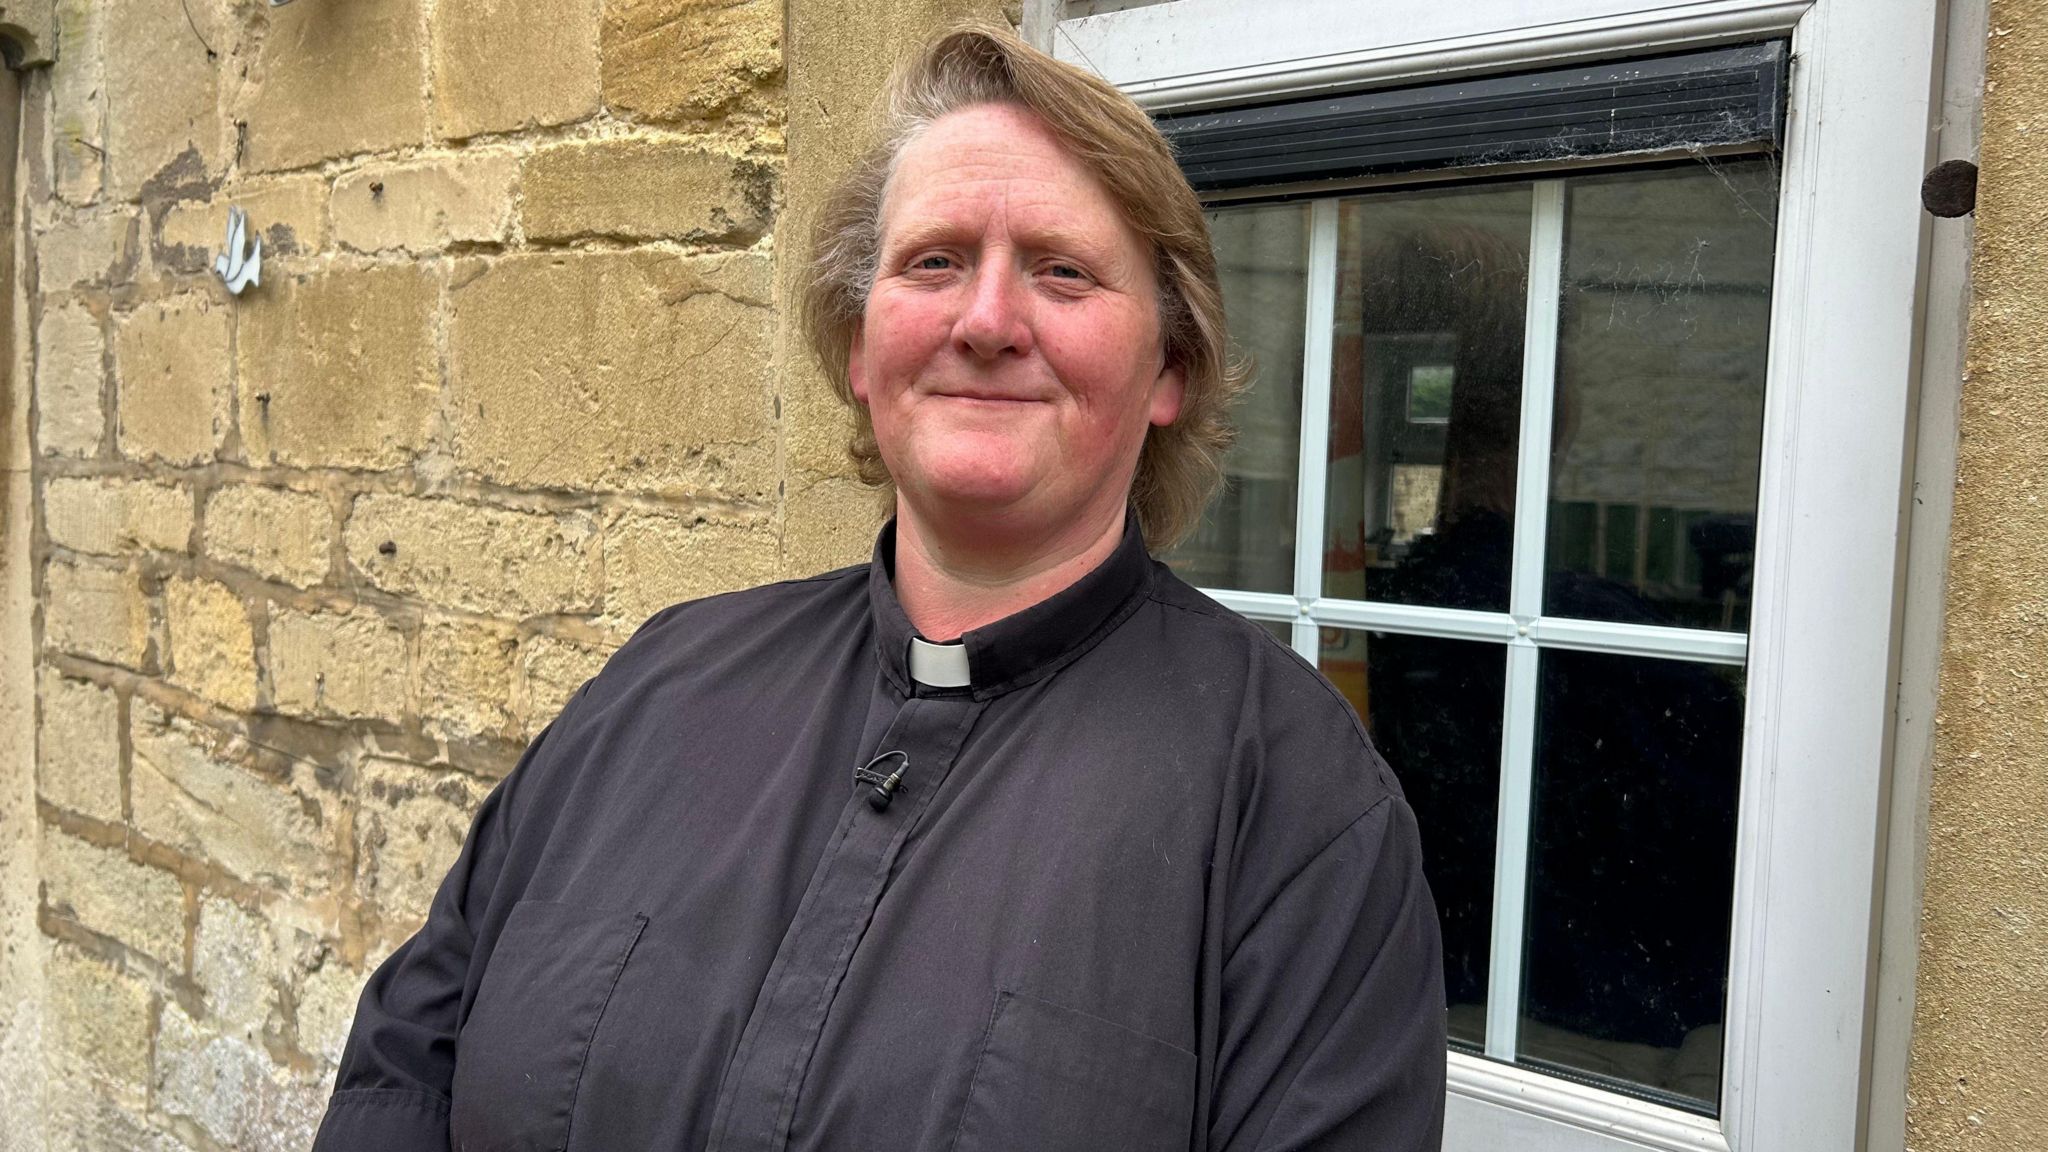 Clair Southgate stood in front of a window wearing her black cassock